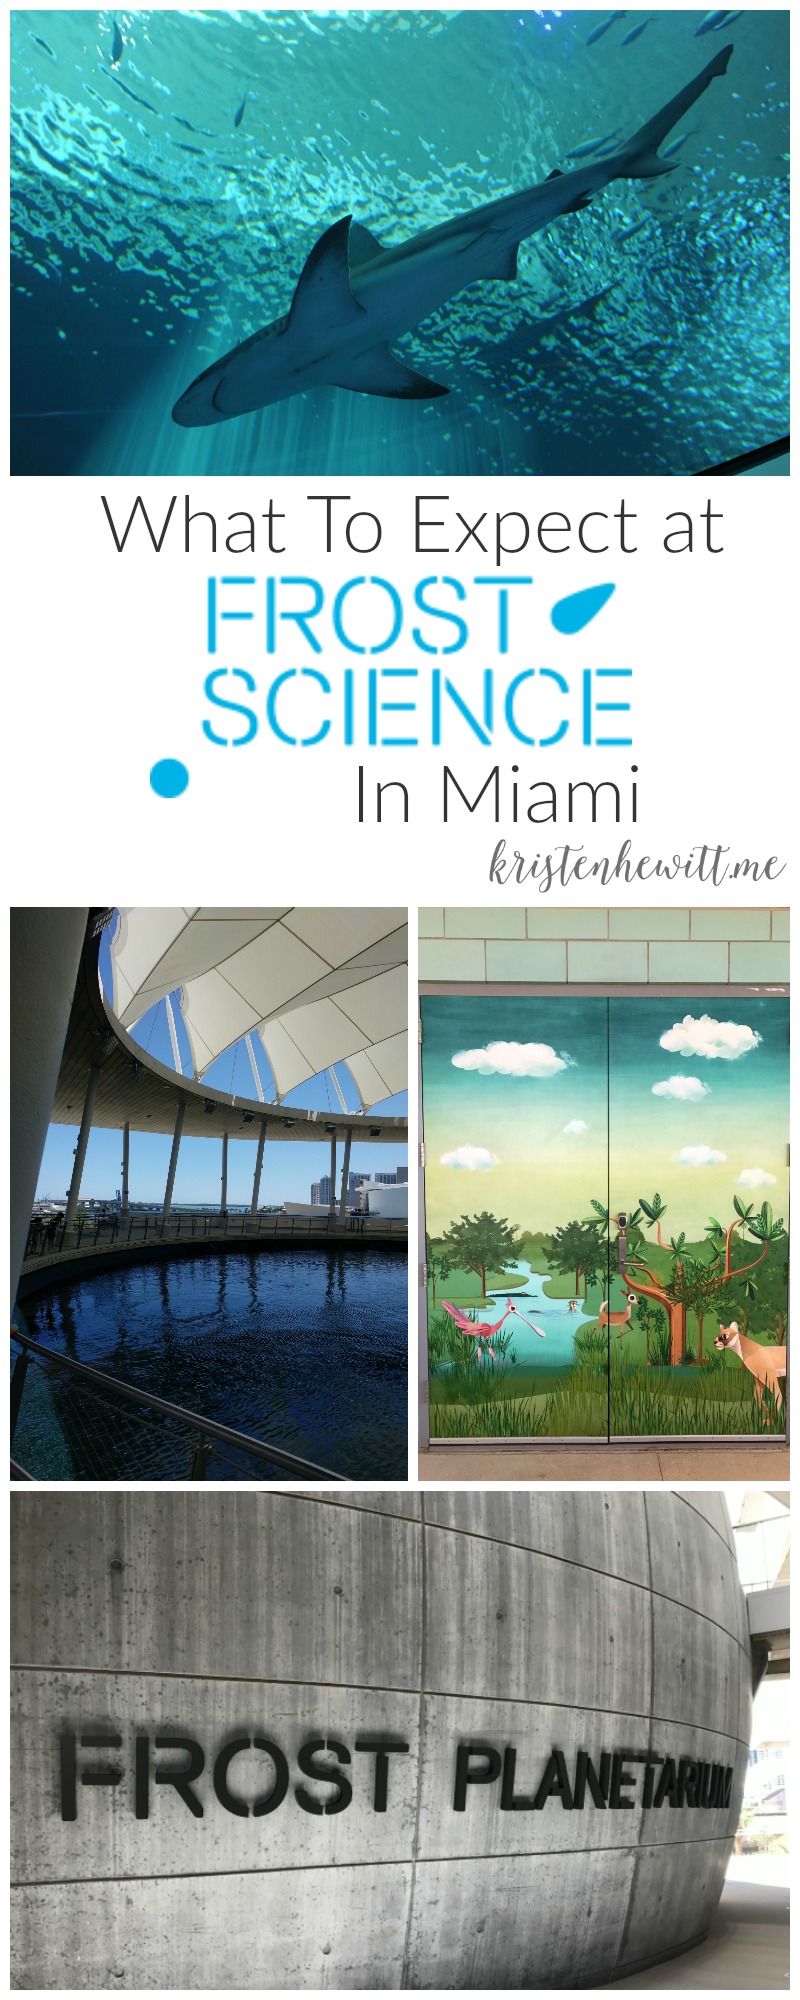 What to Expect at Frost Science in Miami - Kristen Hewitt